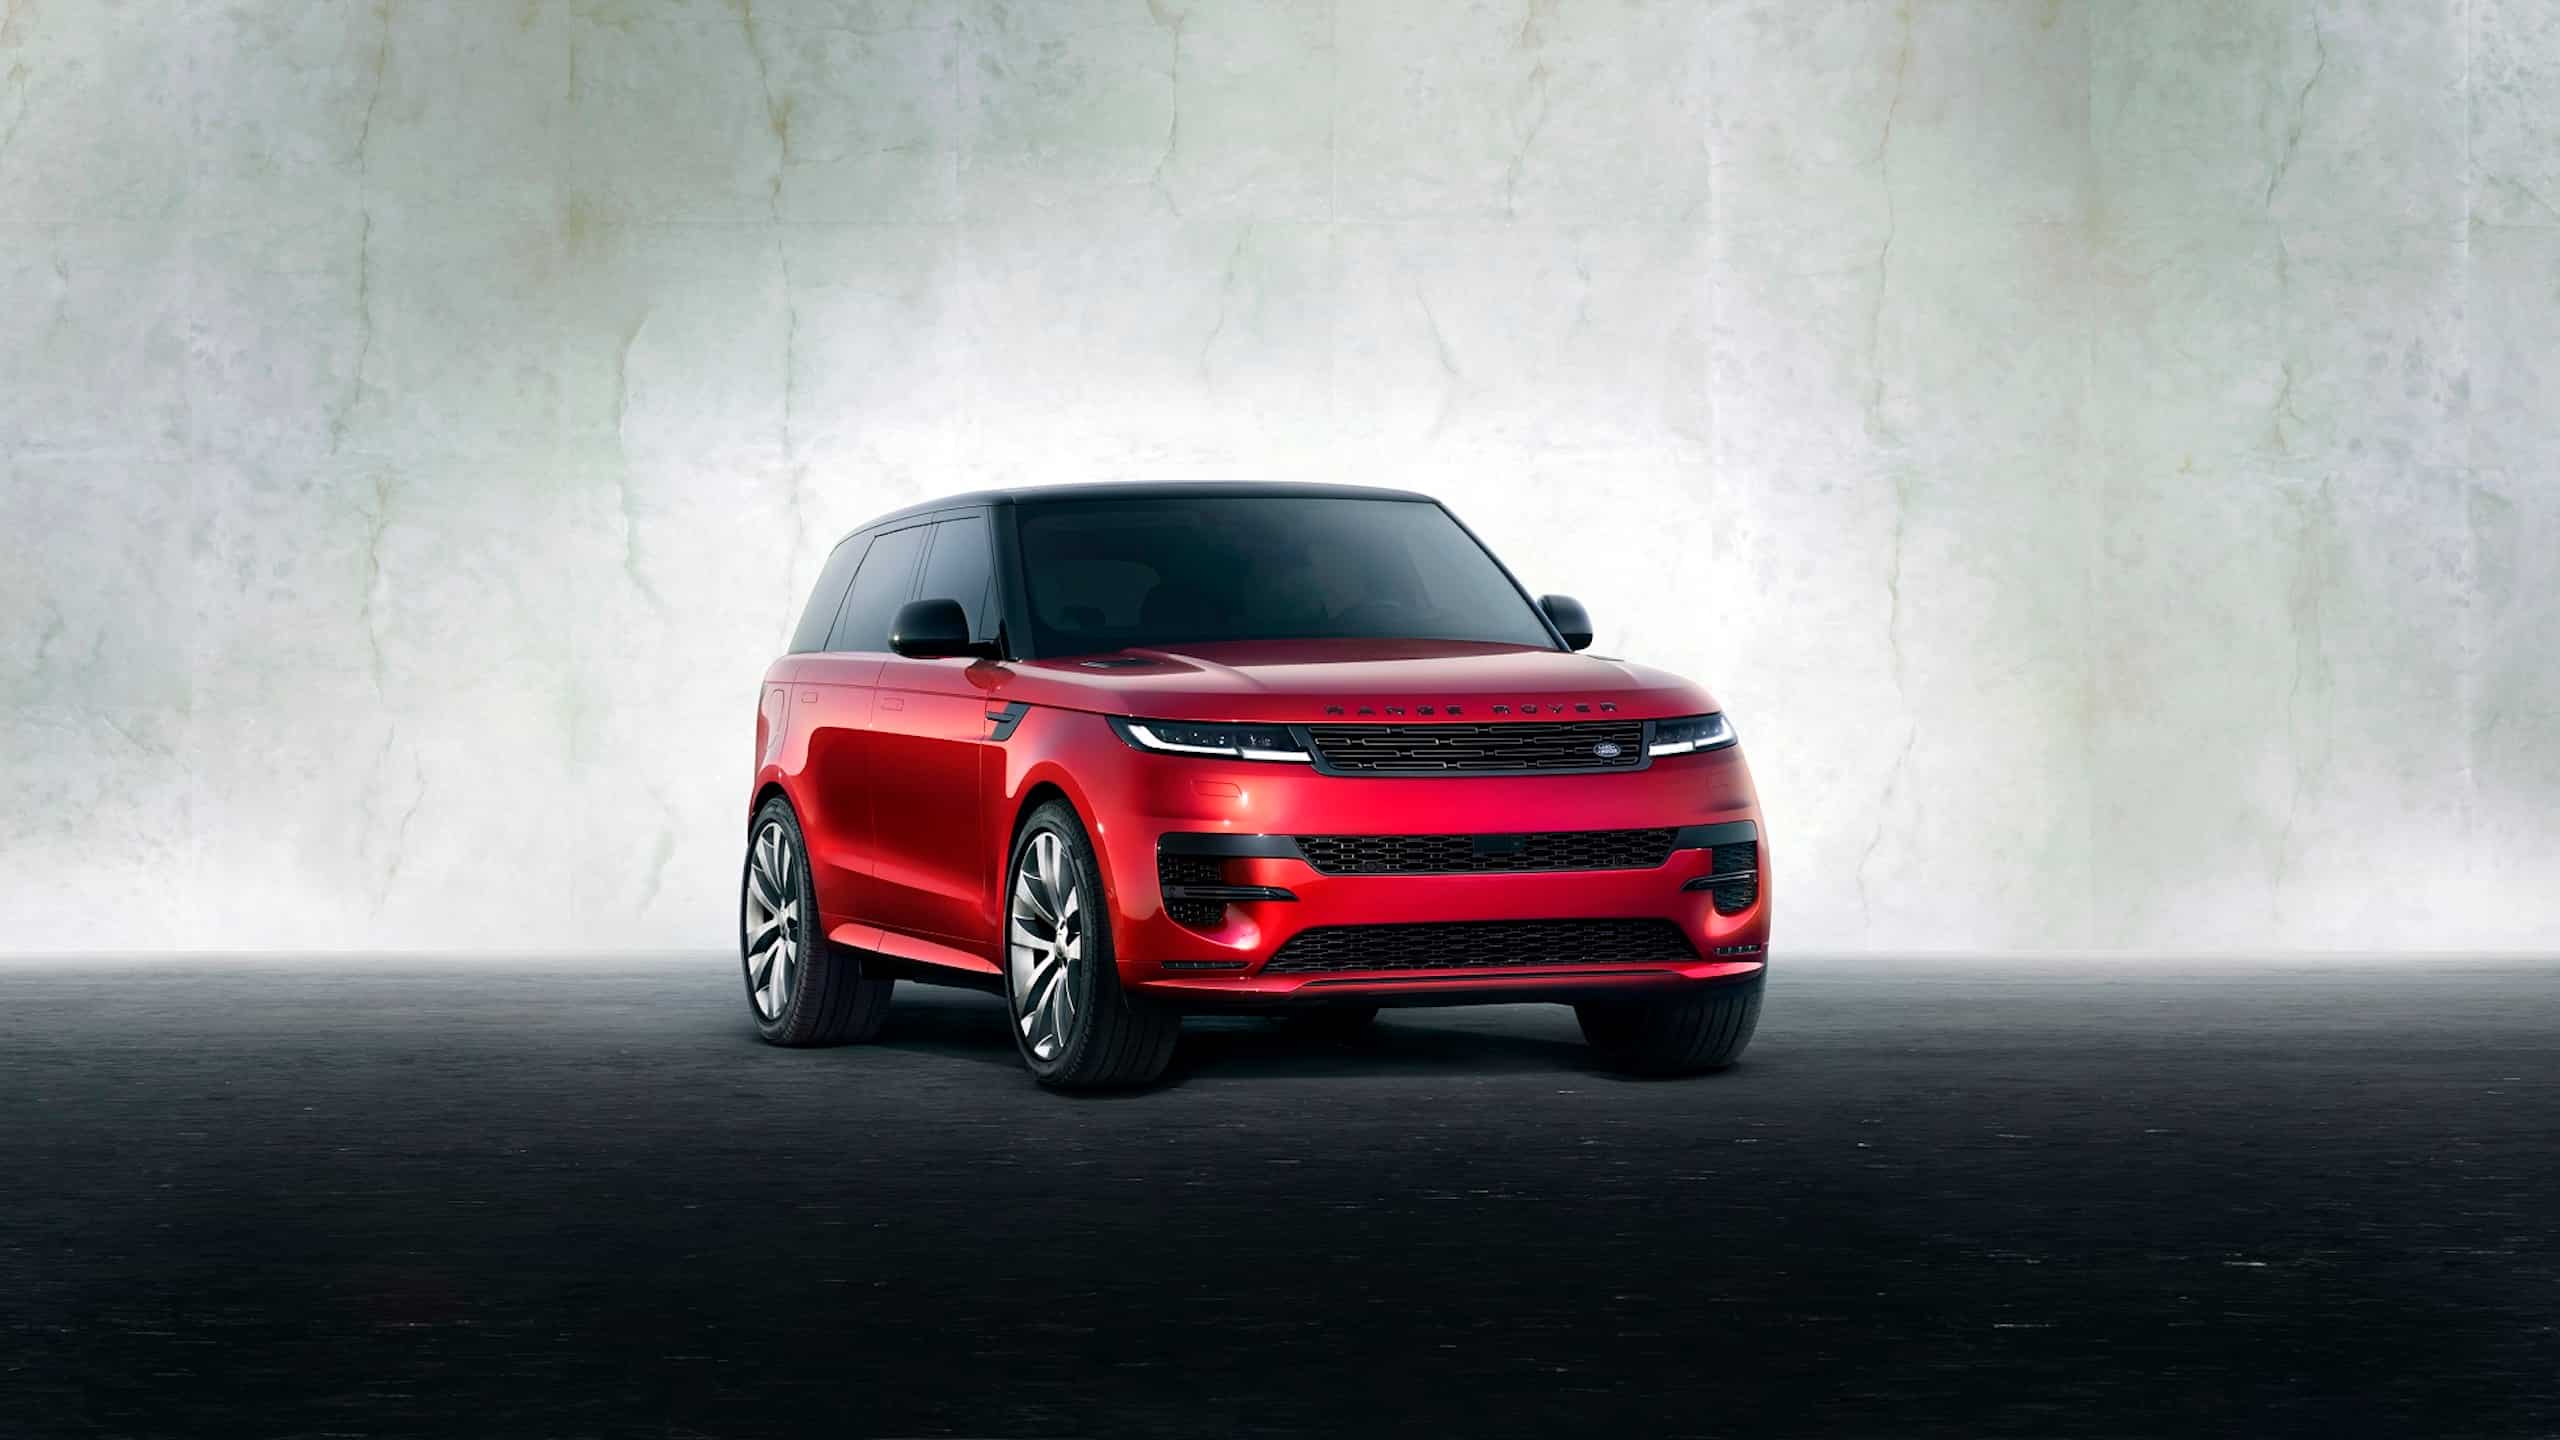 Land Rover's 'All New Range Rover Sport a luxury sports SUV that challenges its limits, unveiled for the first time in the world